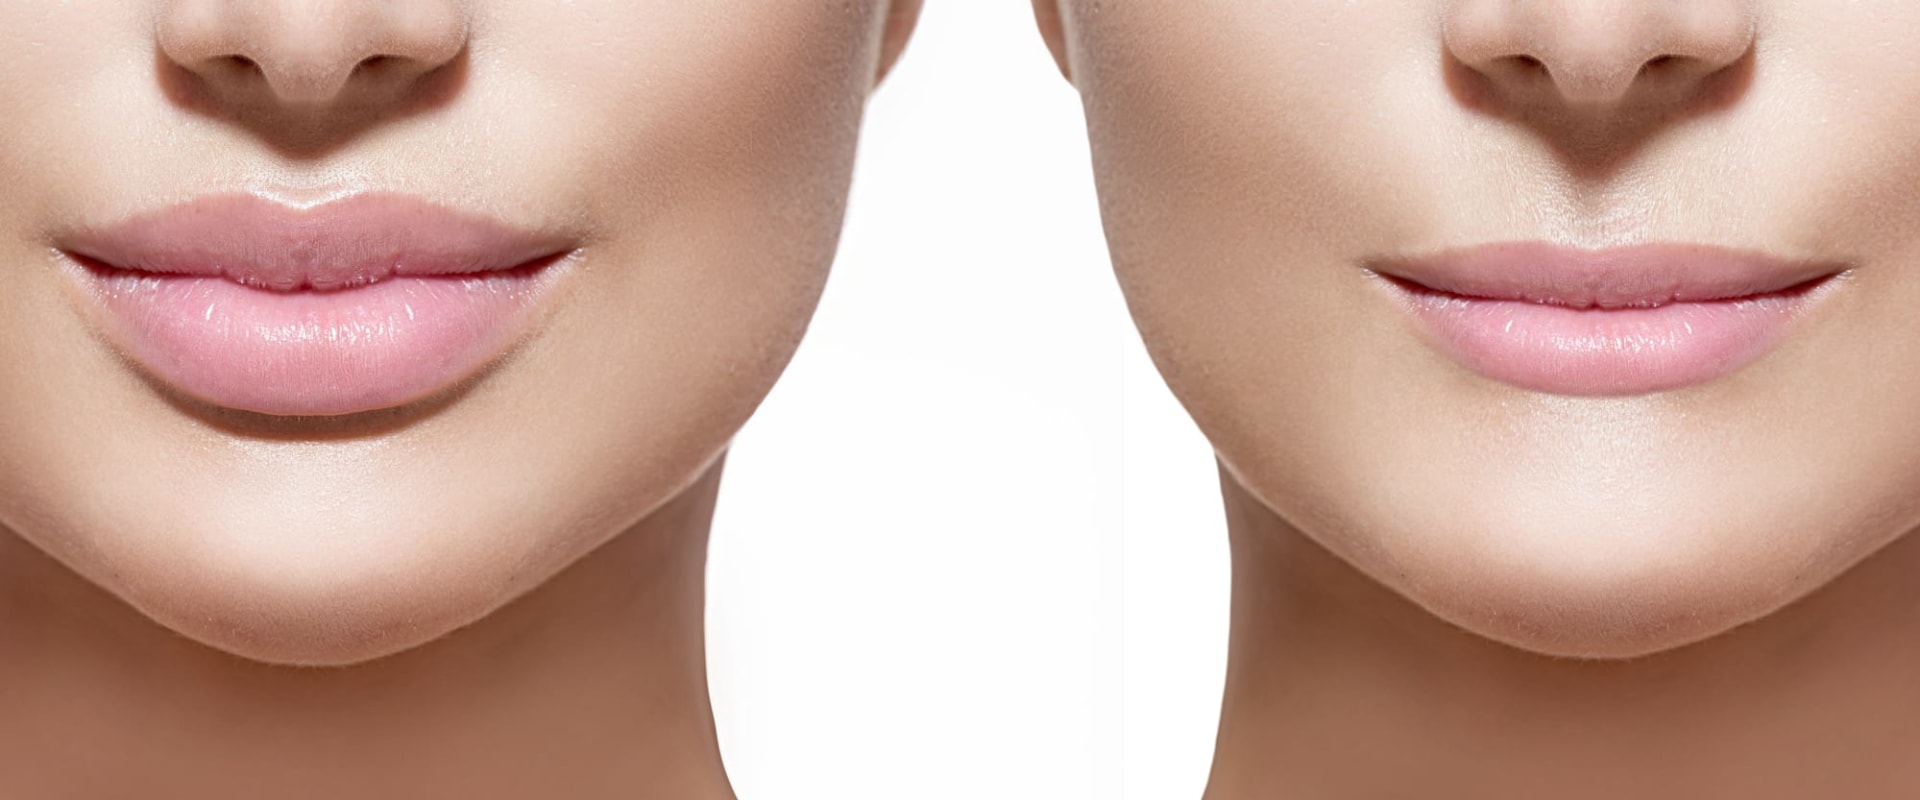 Are Juvederm Injections Safe? An Expert's Perspective